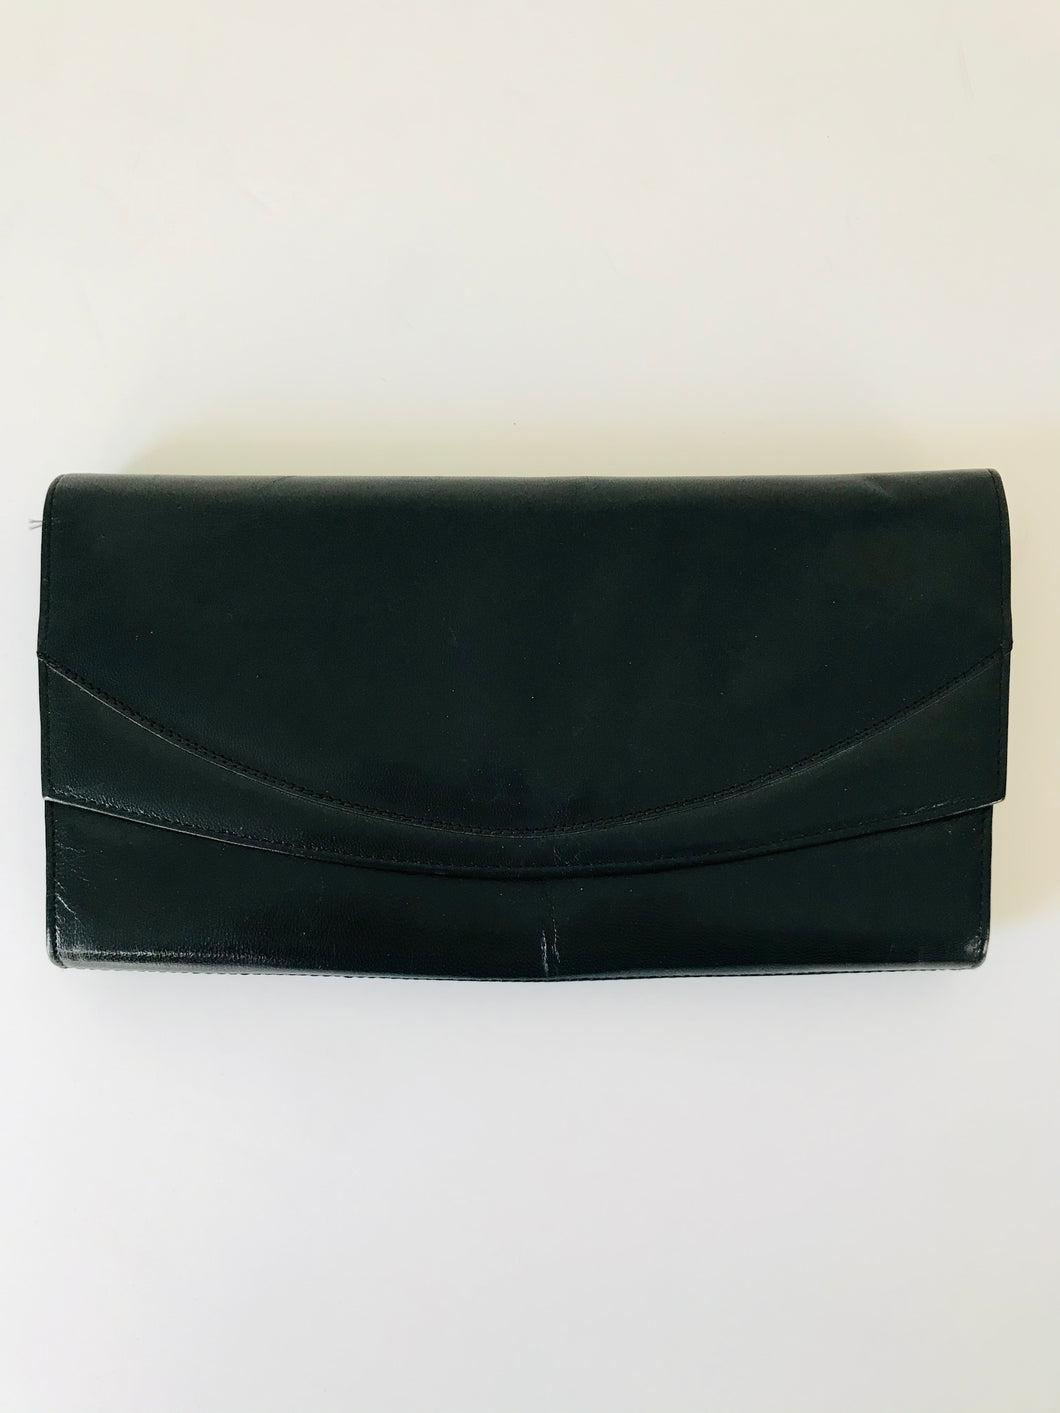 Bally Coordinates Women’s Leather Clutch Bag Purse | Small | Black